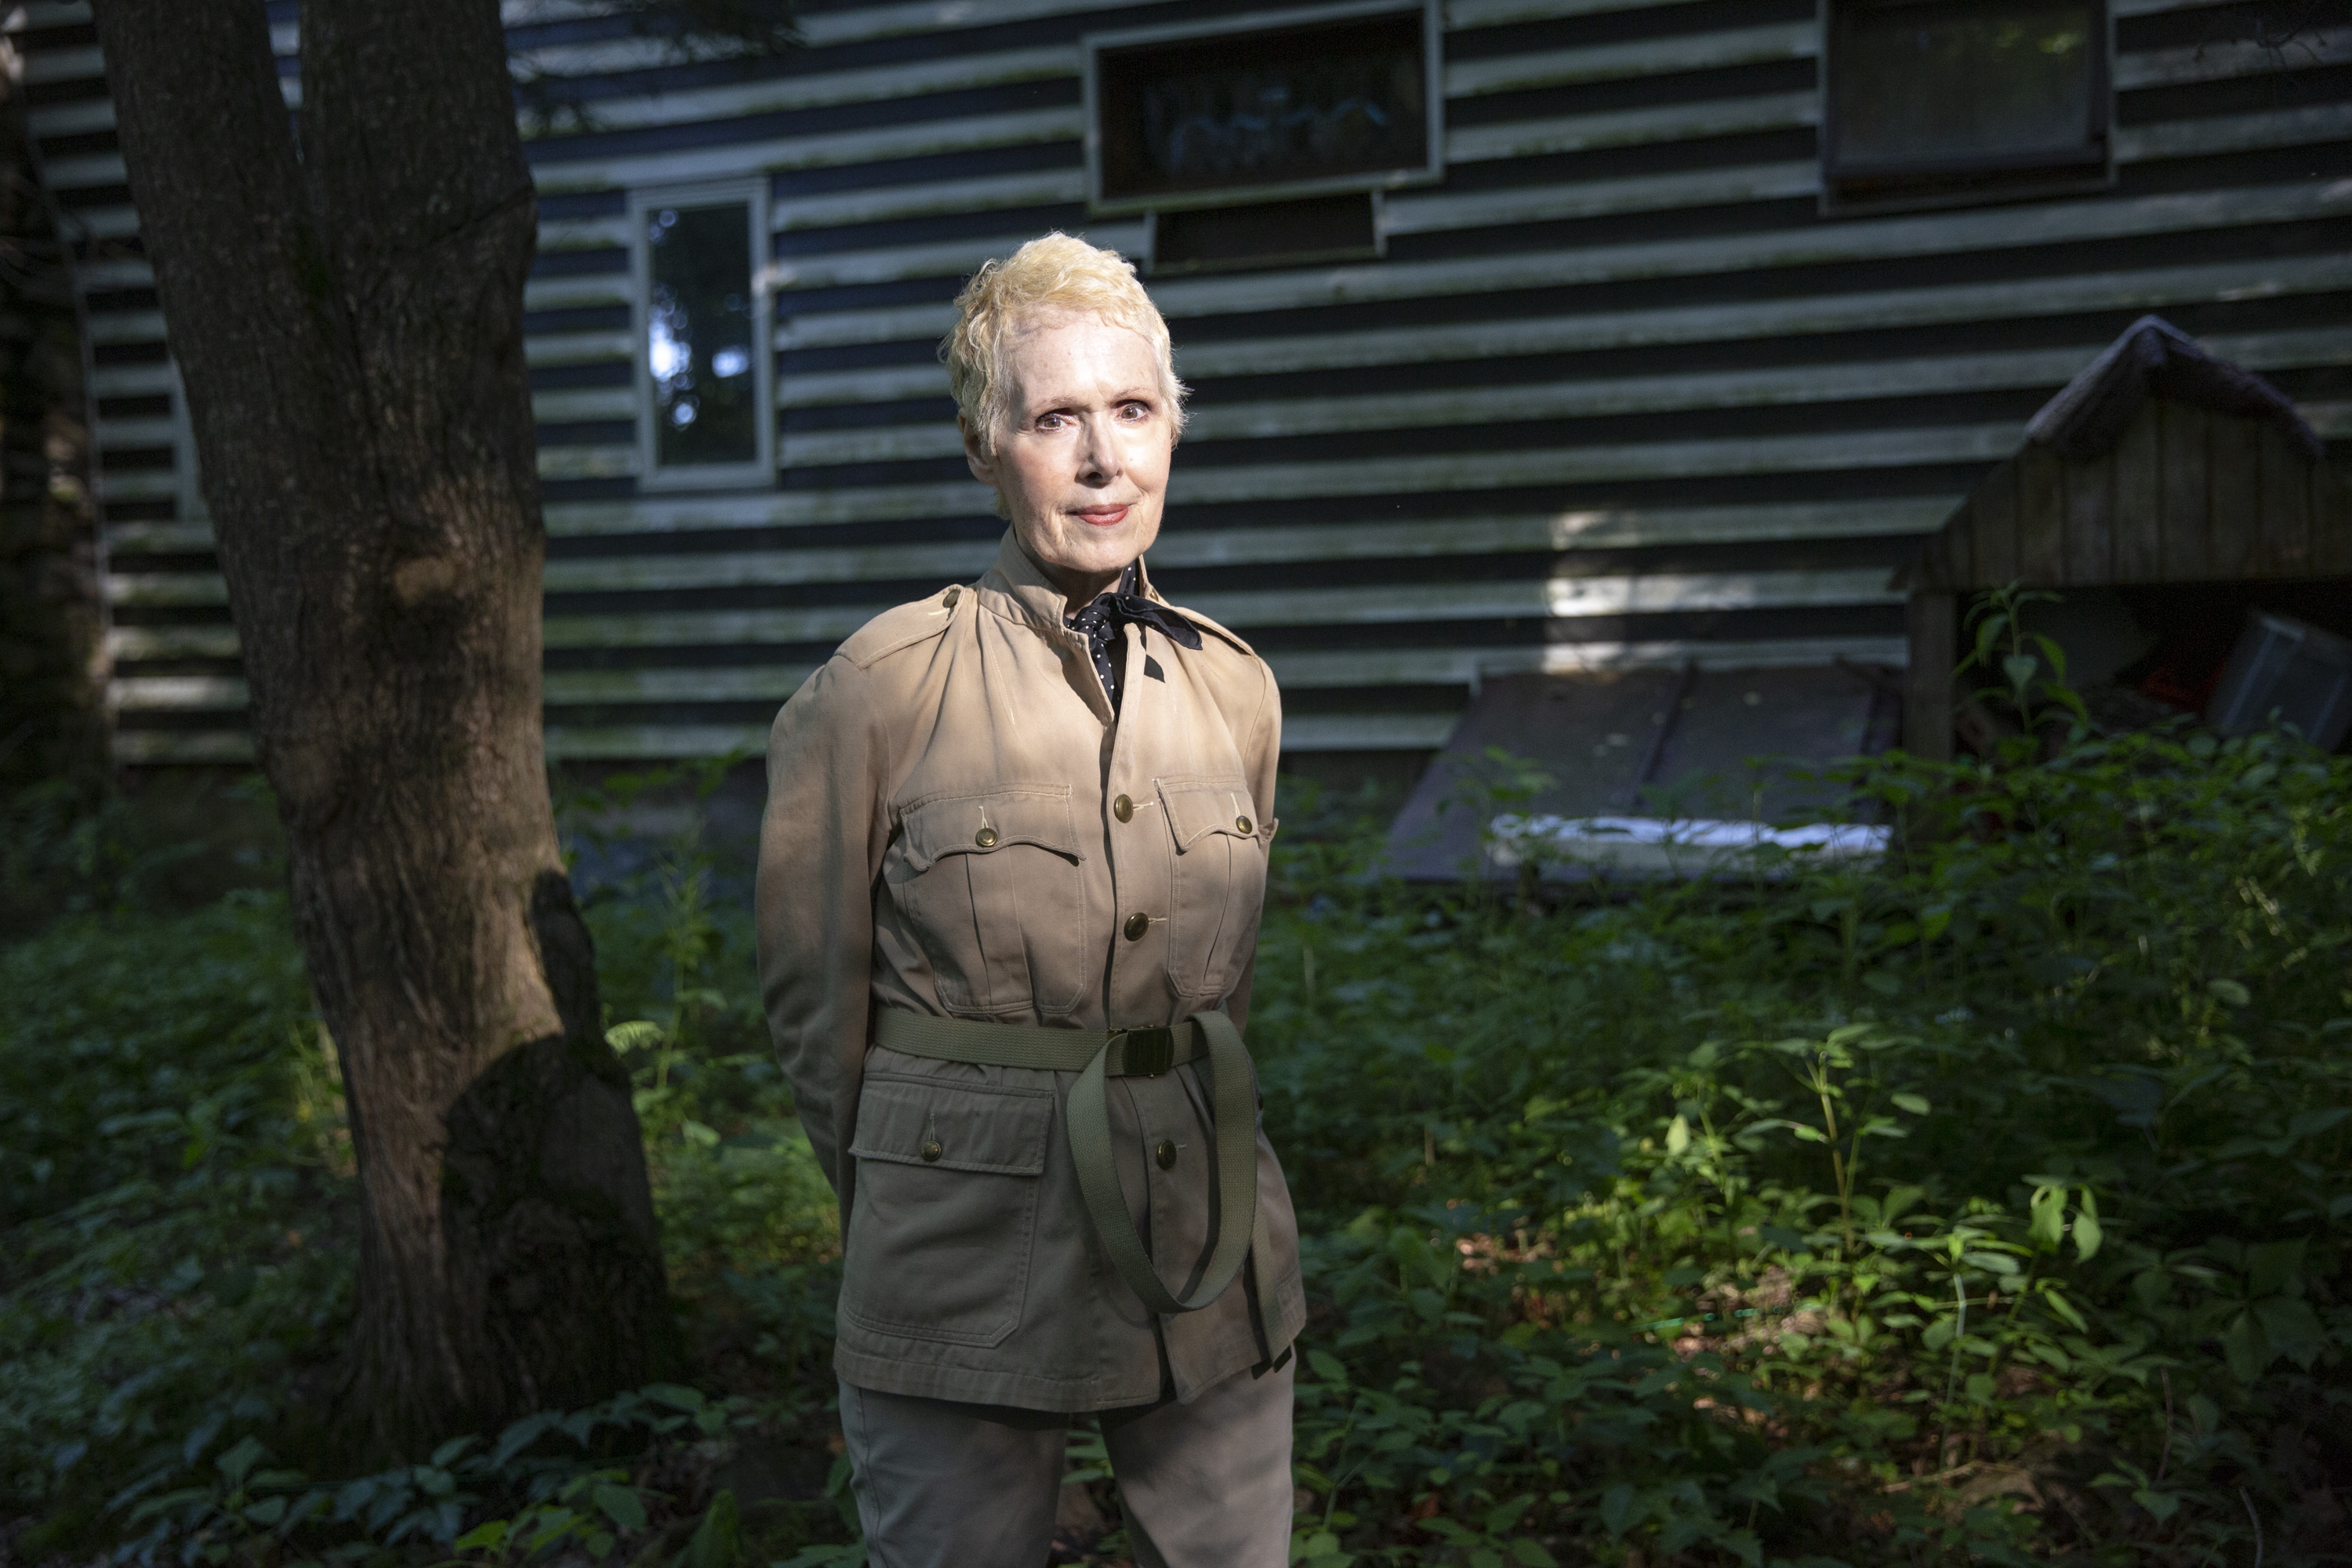 E. Jean Carroll at her home in New York, on June 21, 2019 | Source: Getty Images